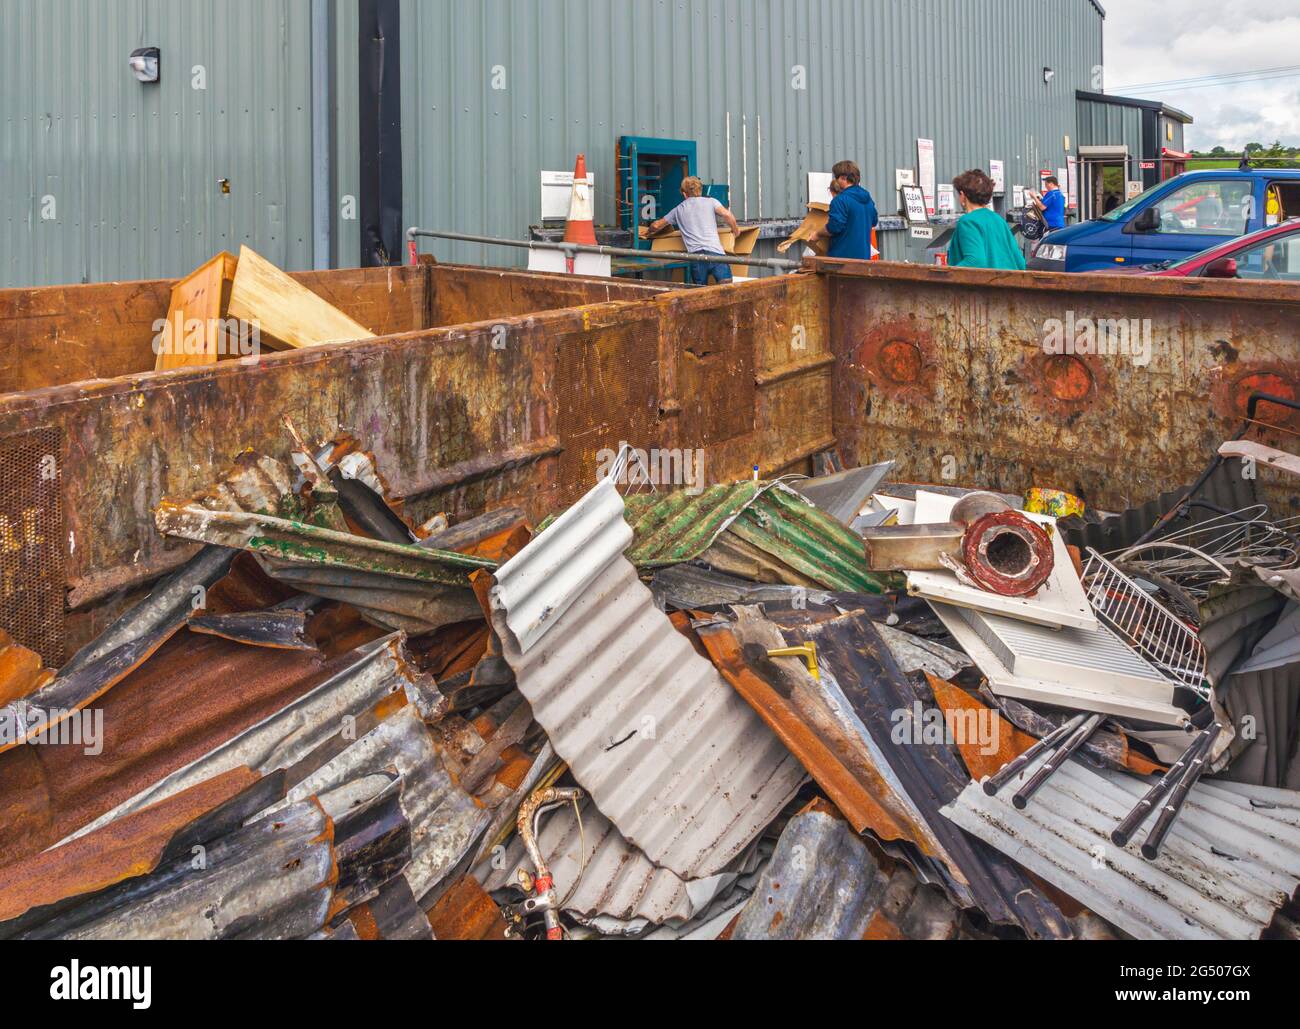 Clonakilty, County Cork, Republic of Ireland.  Eire.  Clonakilty Recycling Centre.  Container full of scrap metal.  People in background deposit cardb Stock Photo